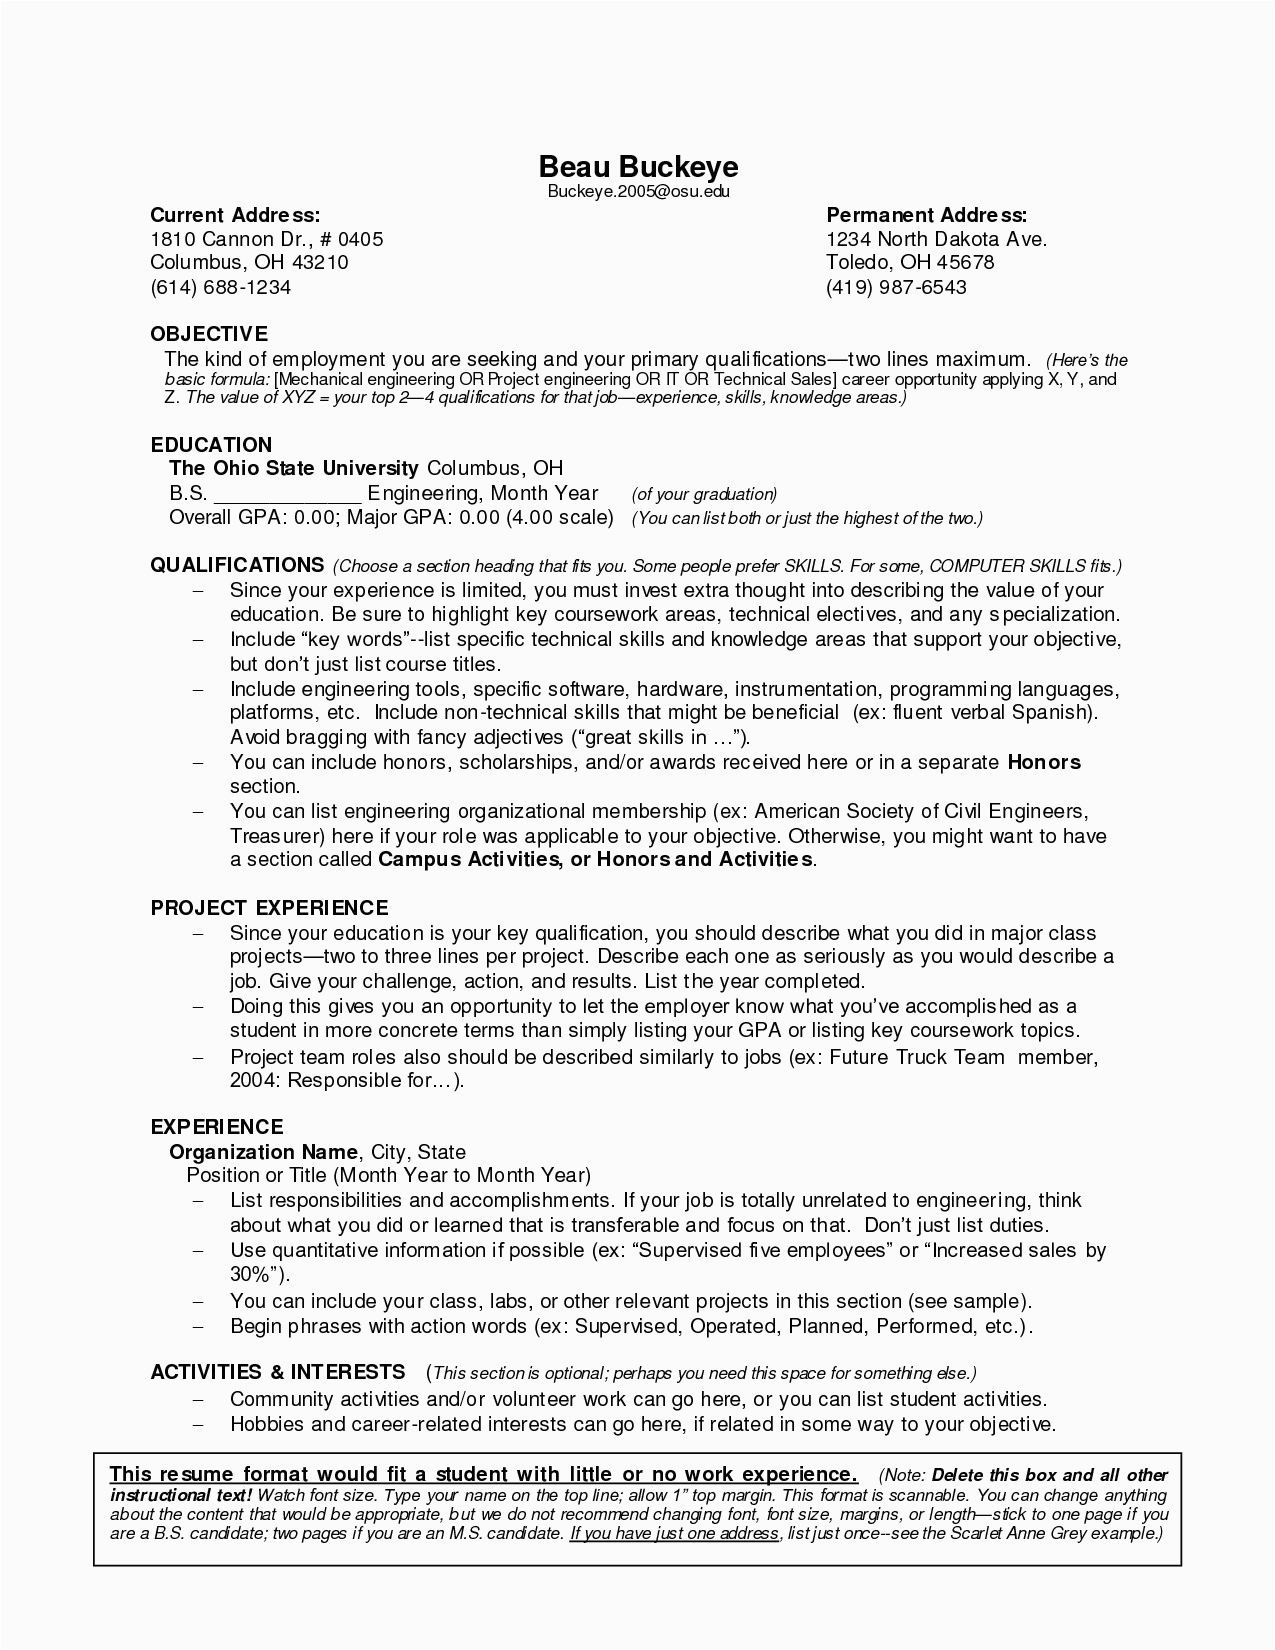 Sample Summary for Resume with No Experience 14 Professional Summary for Resume No Work Experience